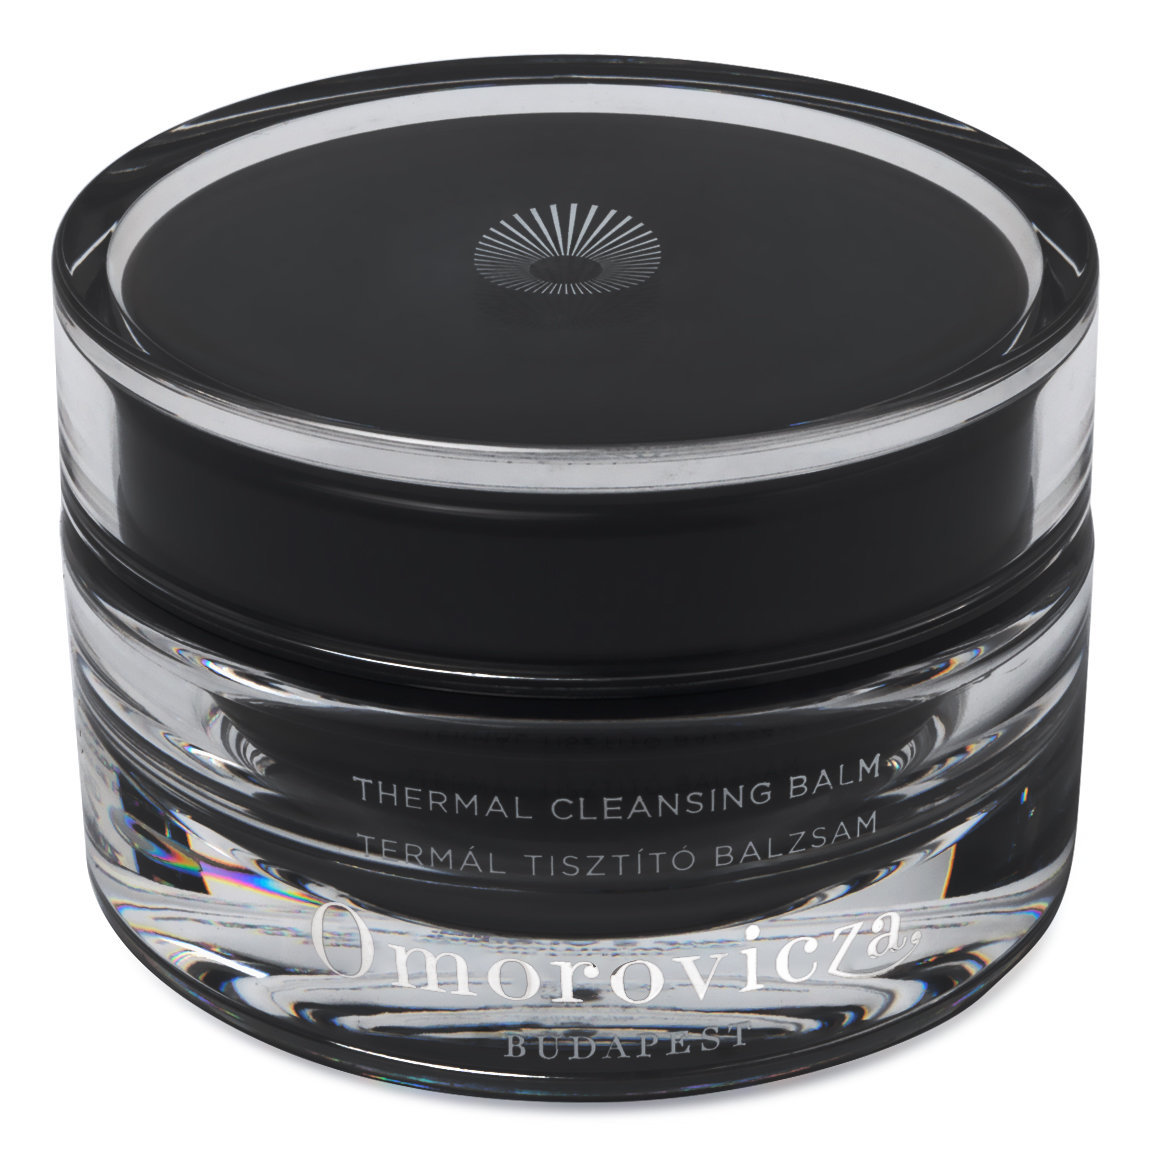 Omorovicza Thermal Cleansing Balm 100 ml alternative view 1 - product swatch.